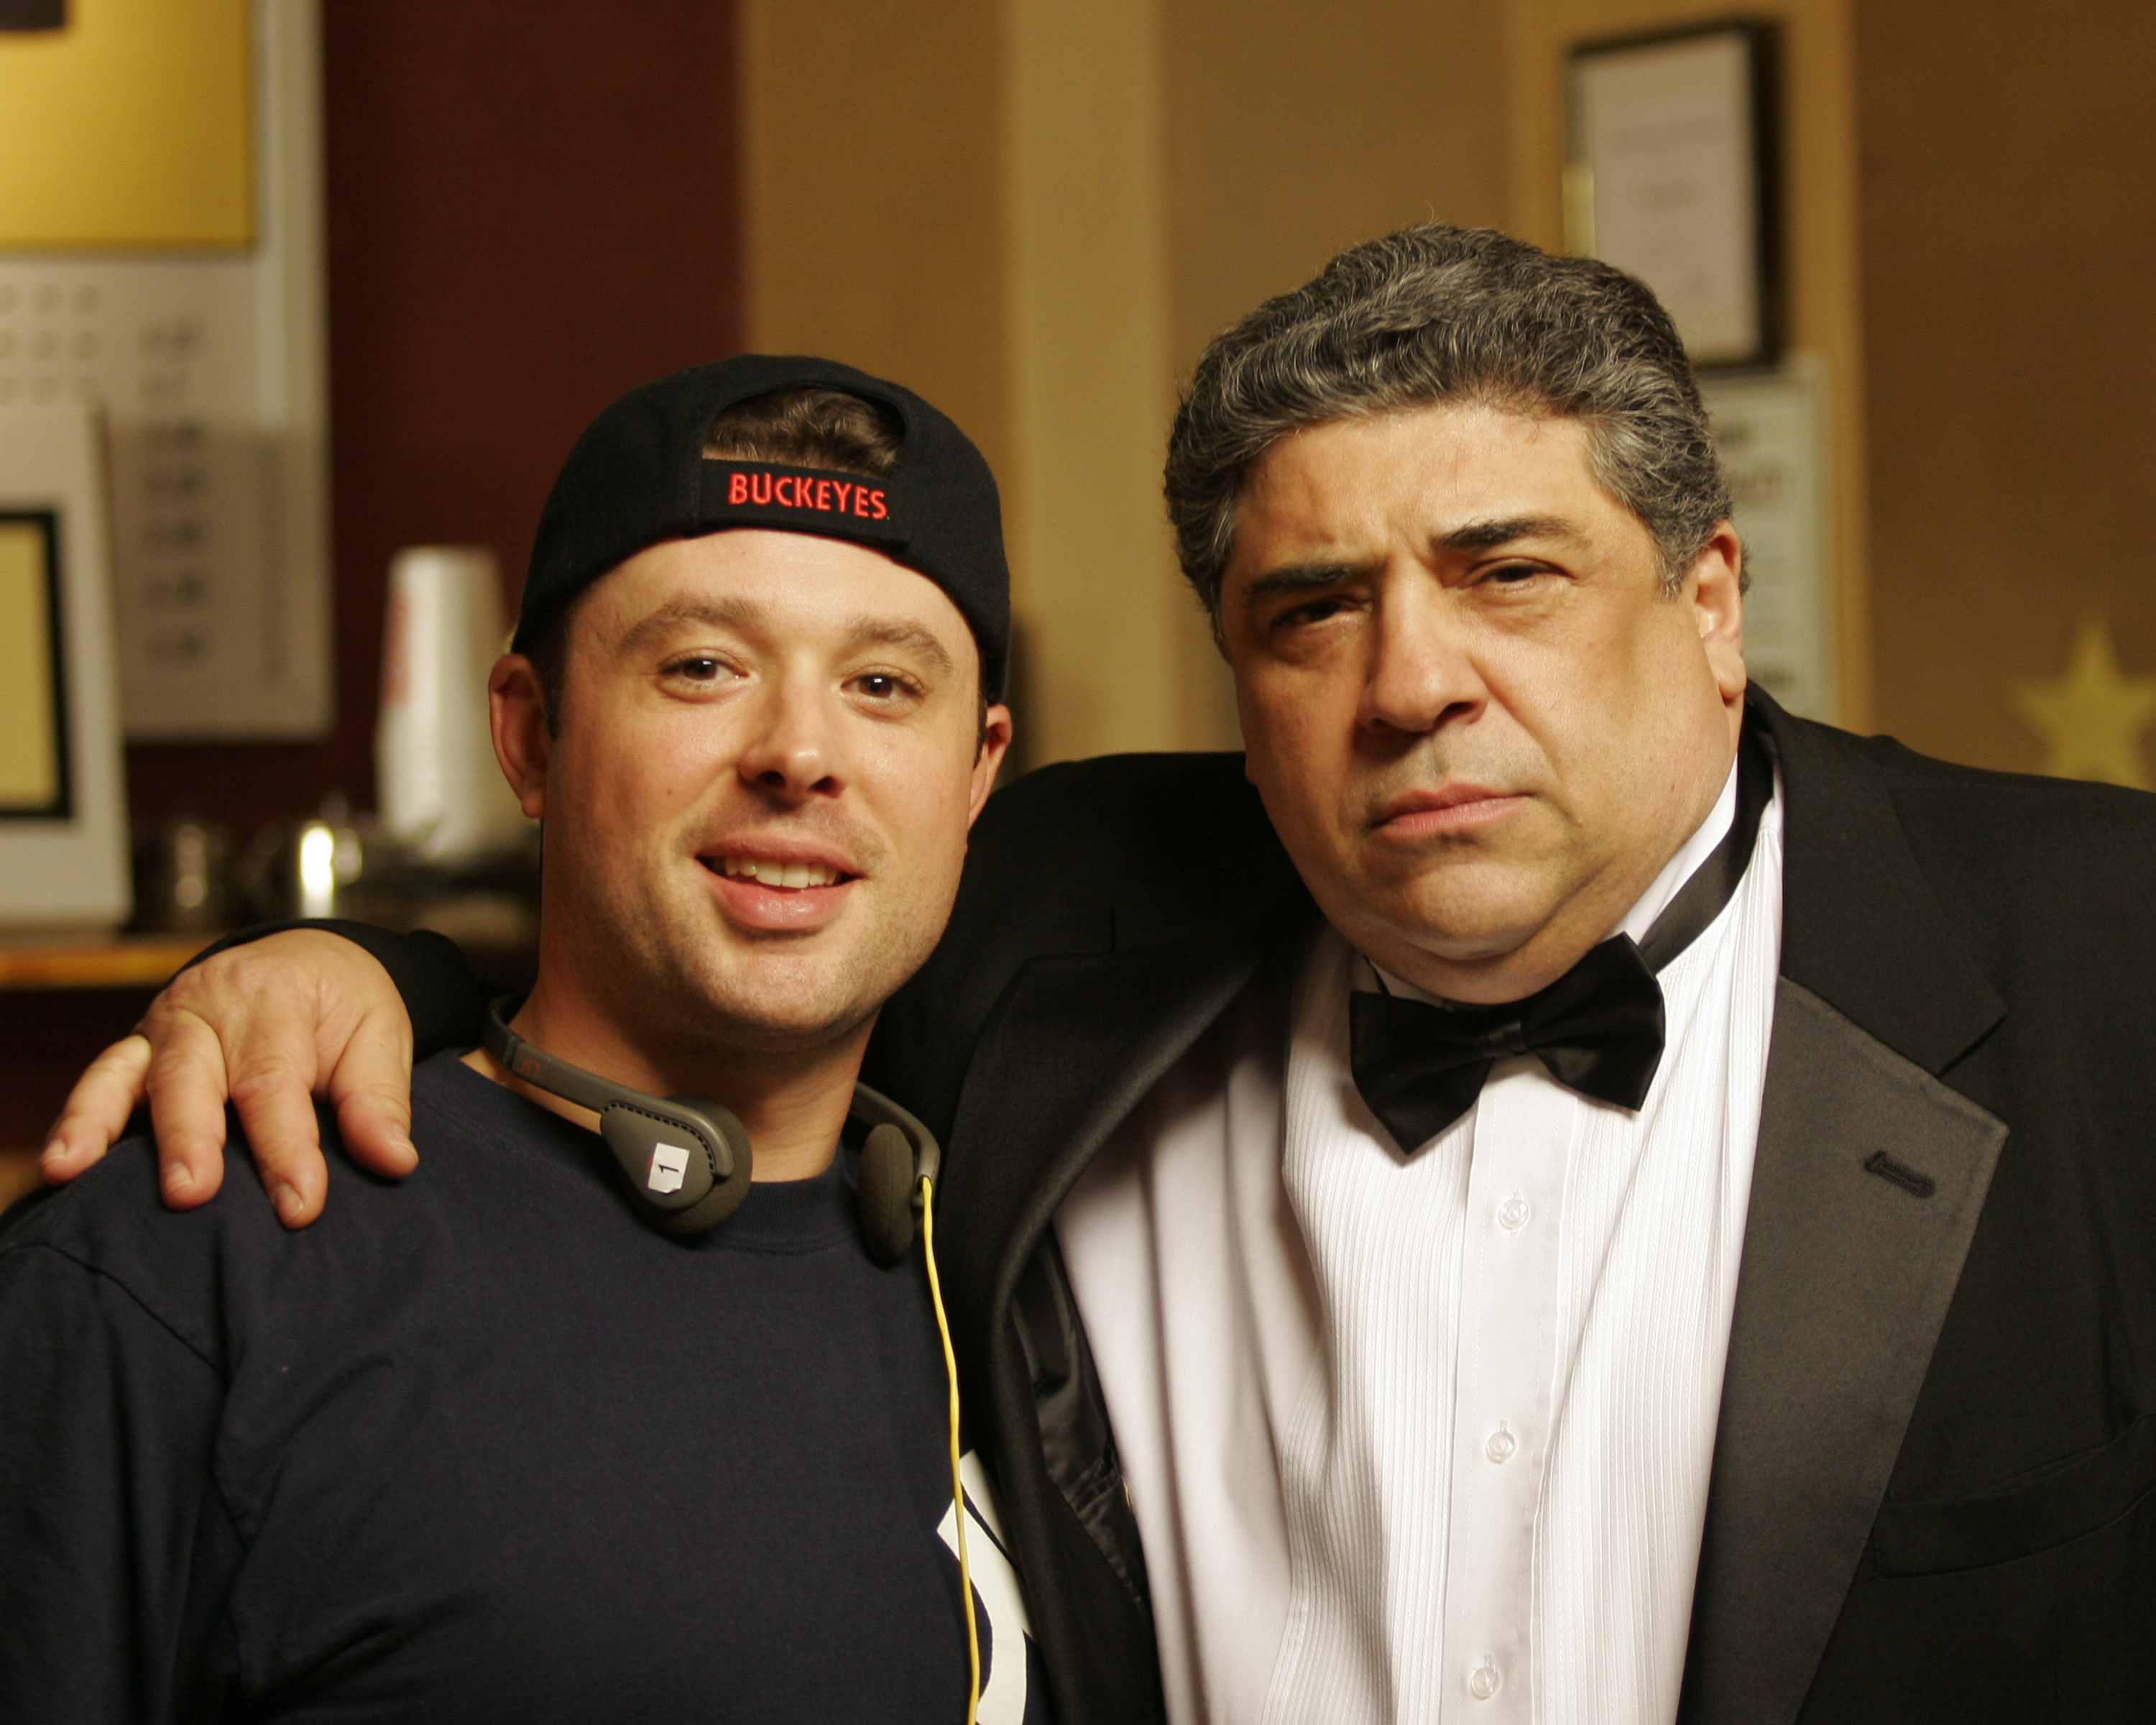 With Vincent Pastore on Strike set